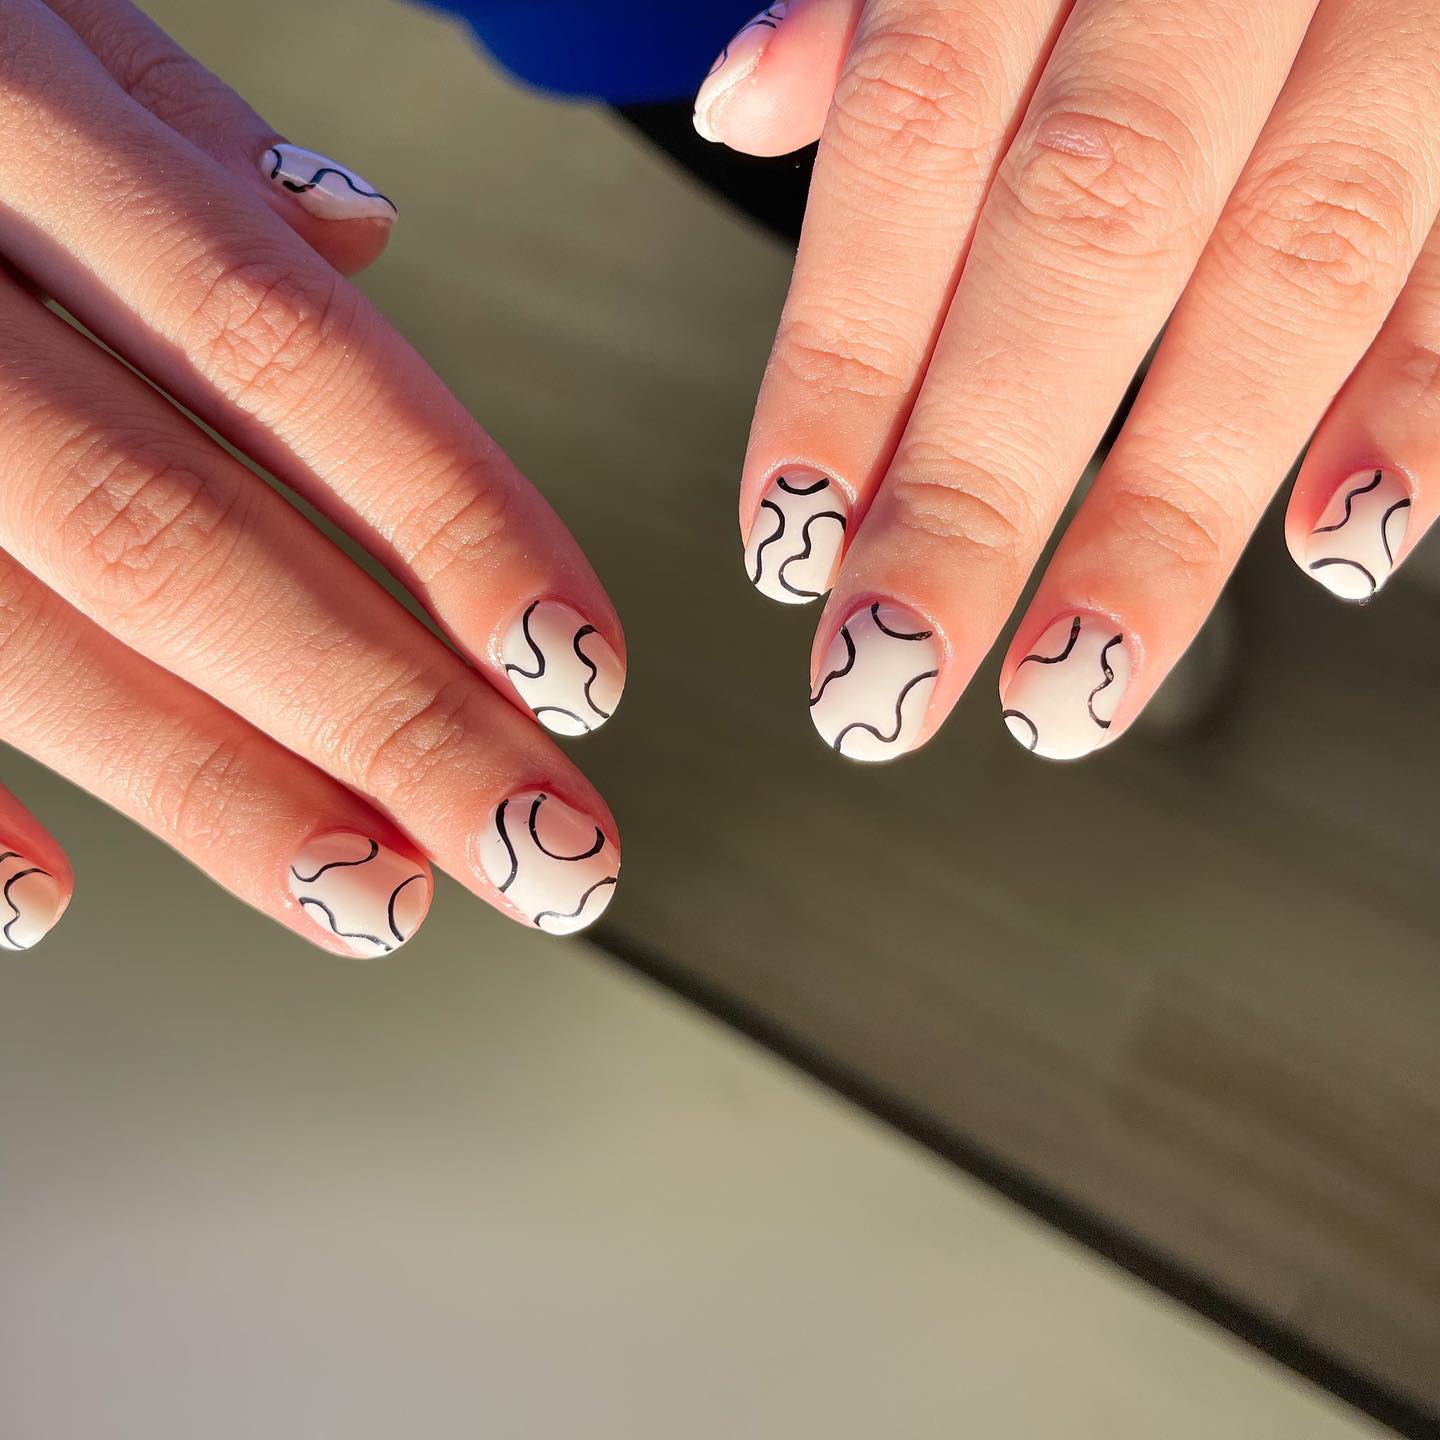 Do you have nail art on your nails? Can I see them? - Quora